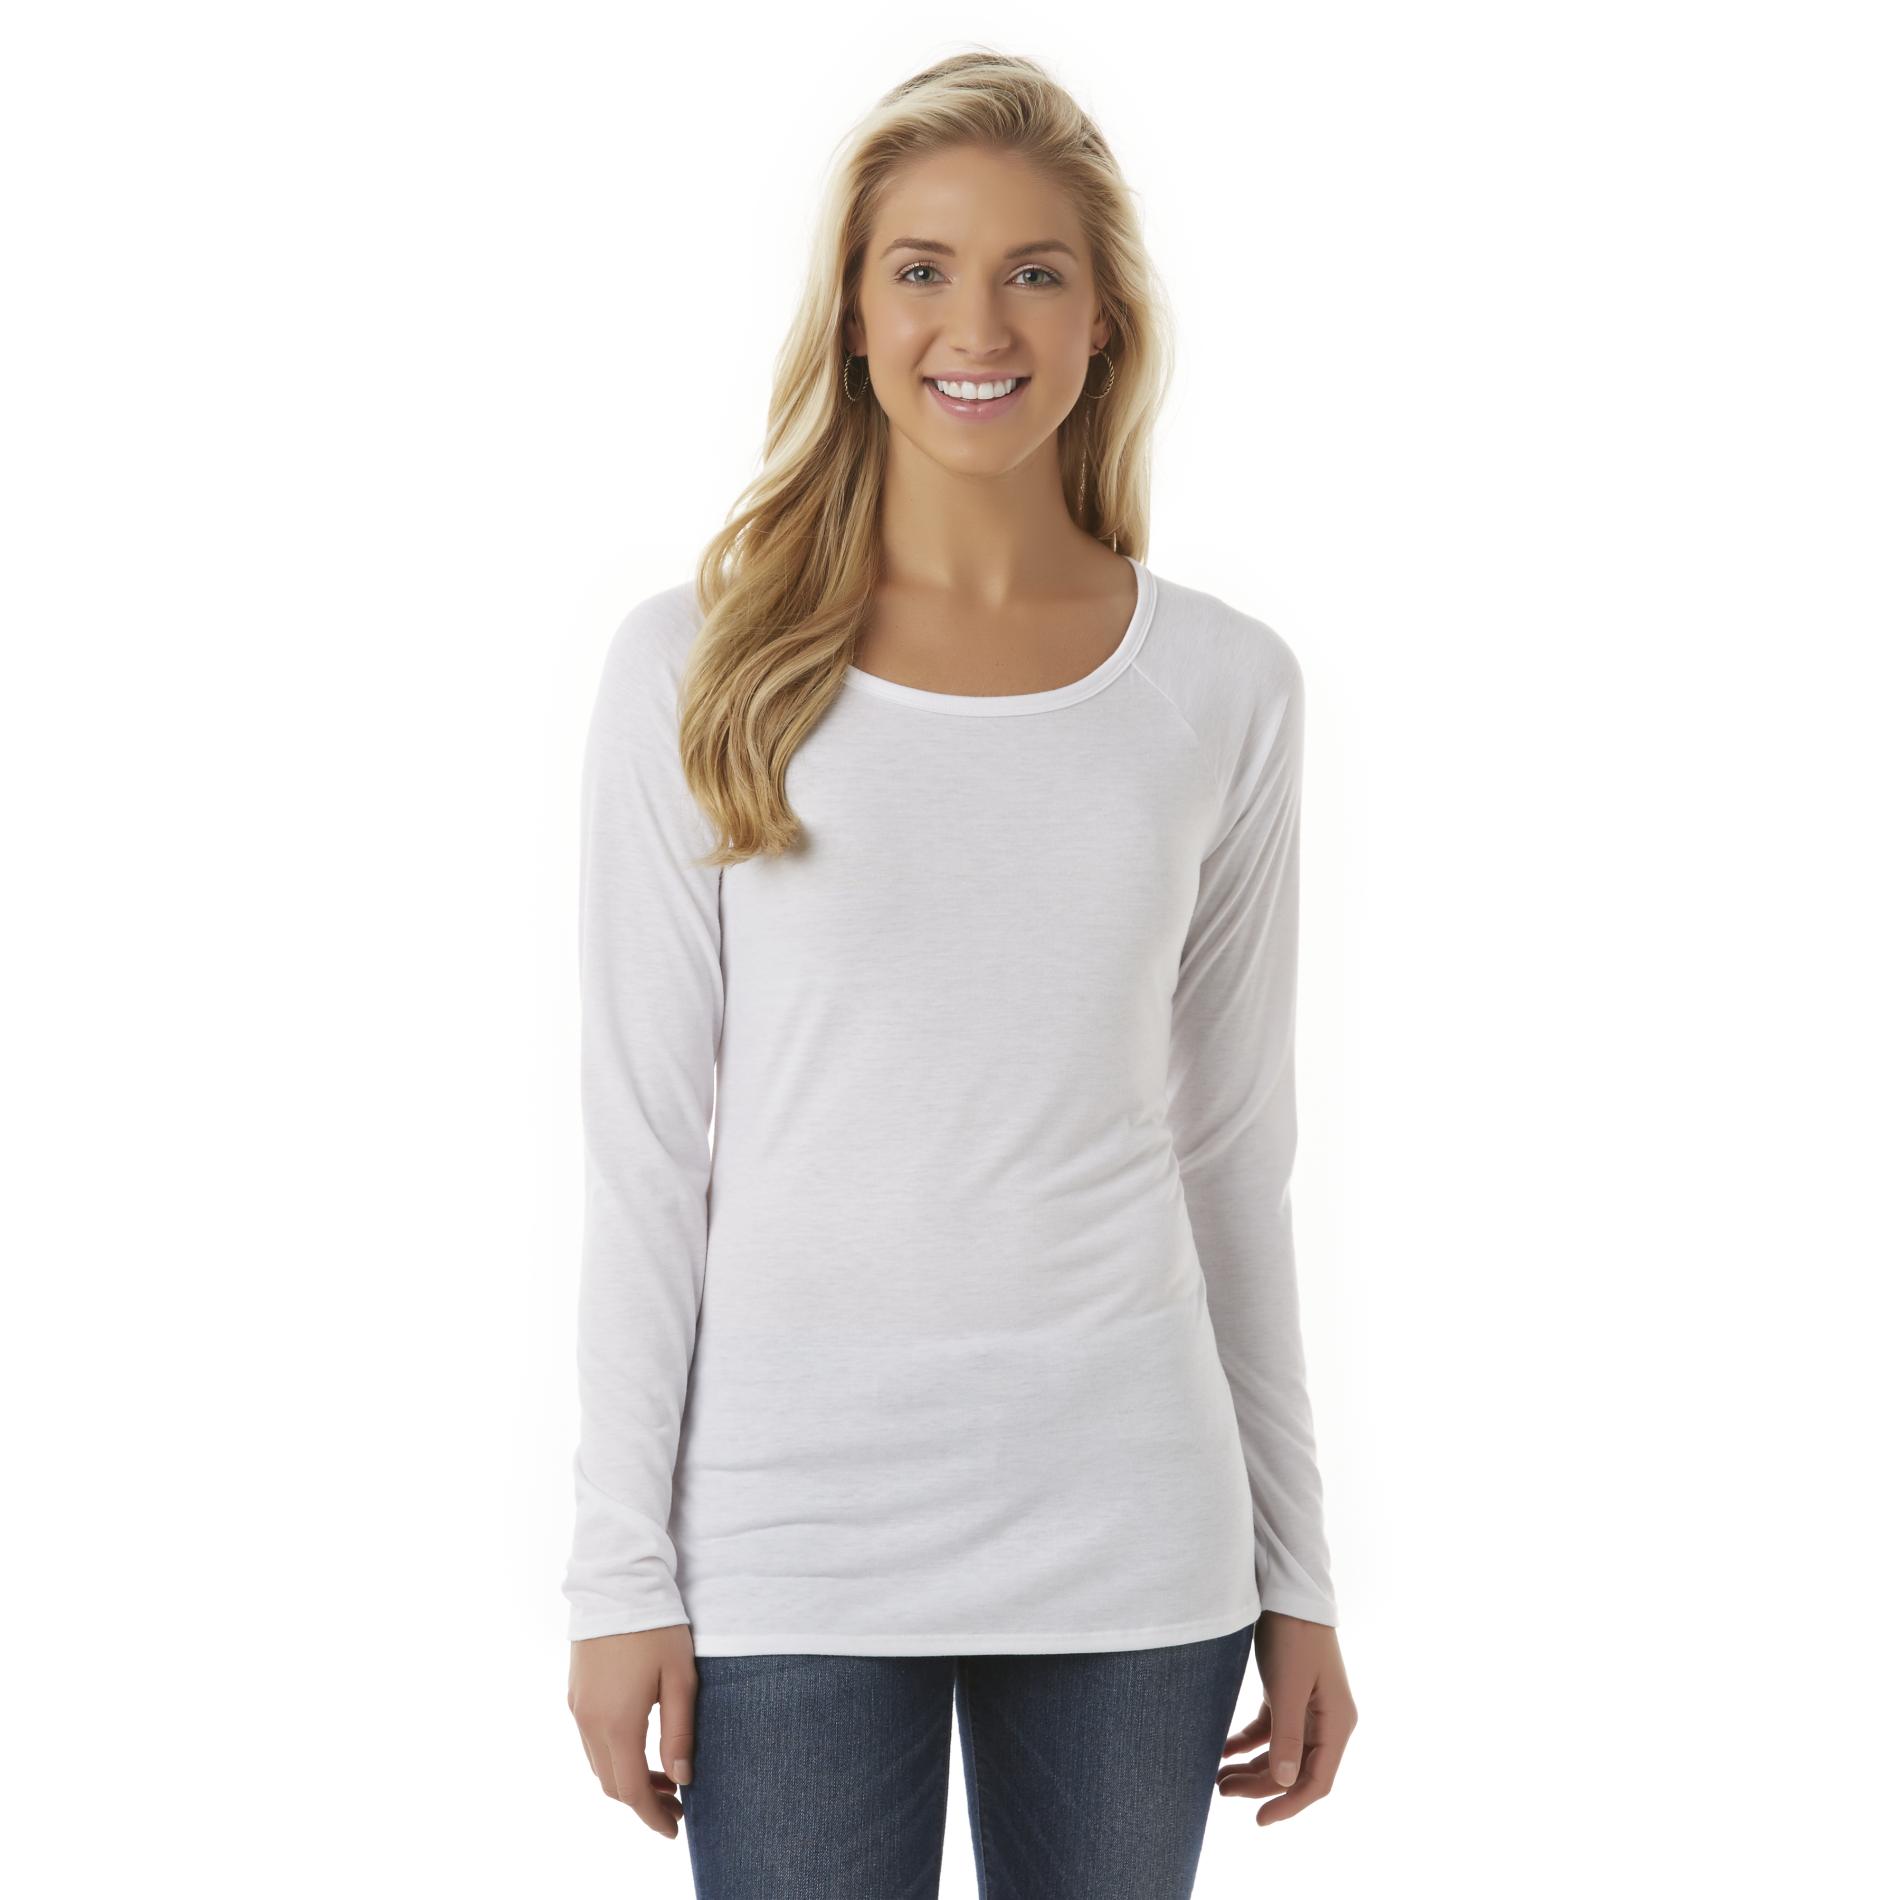 Simply Styled Women's Scoop Neck Top